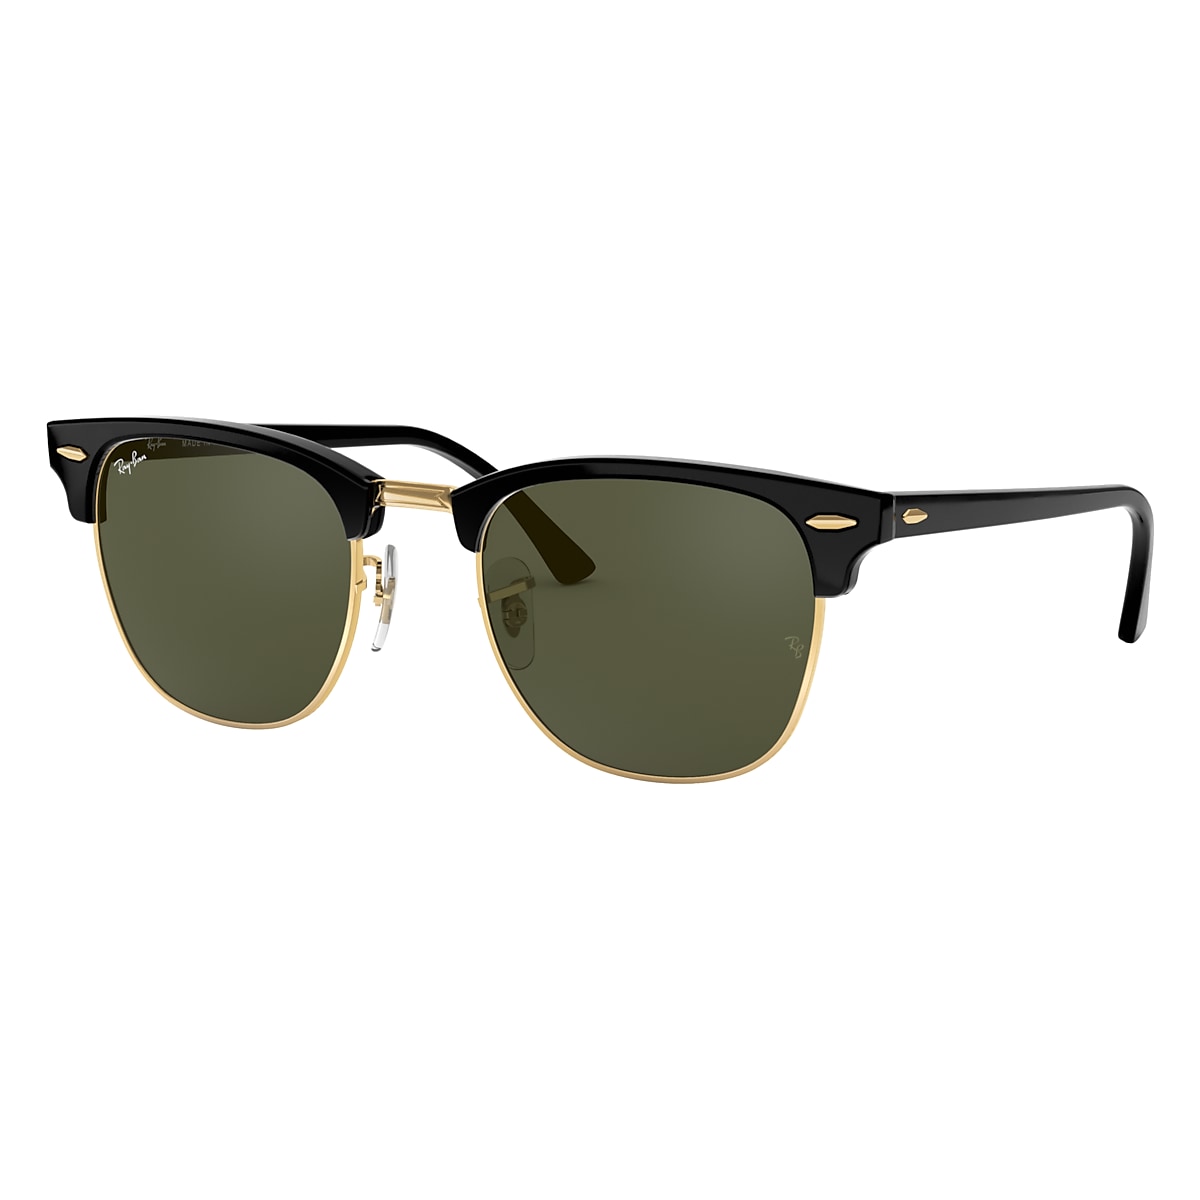 CLUBMASTER CLASSIC Sunglasses in Black On Gold and Green - RB3016 